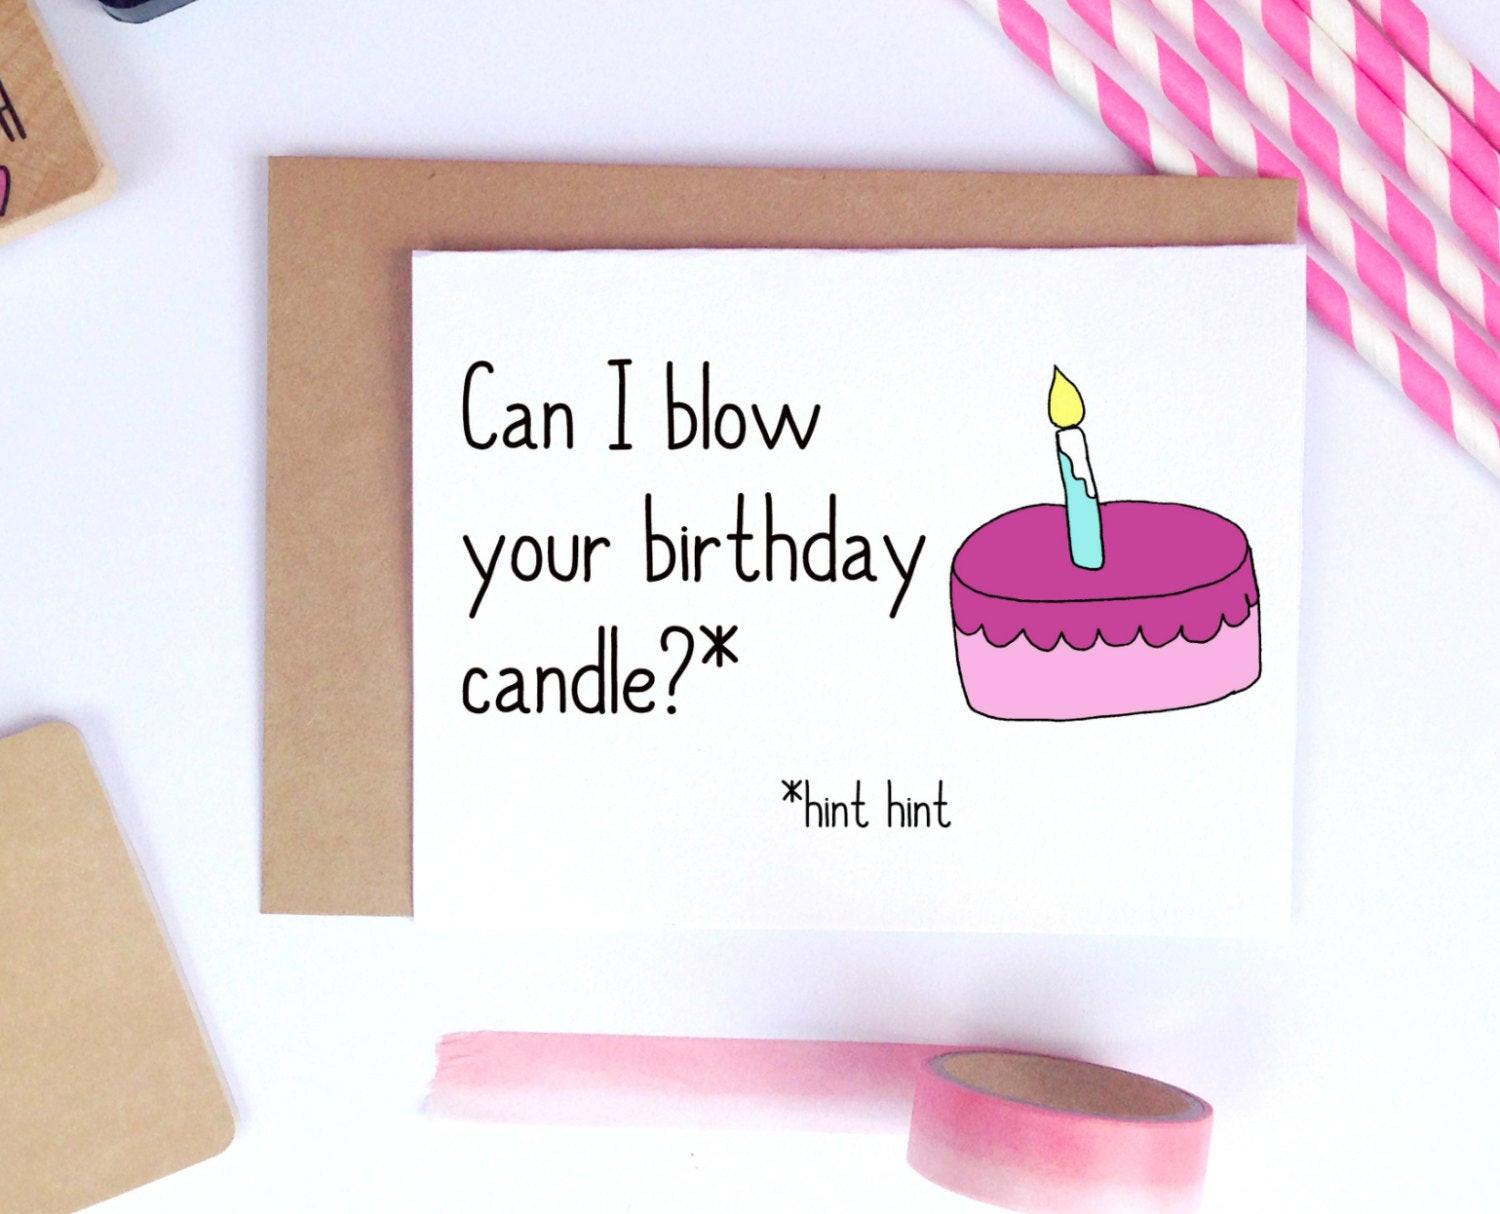 the-21-best-ideas-for-funny-dirty-birthday-cards-home-family-style-and-art-ideas